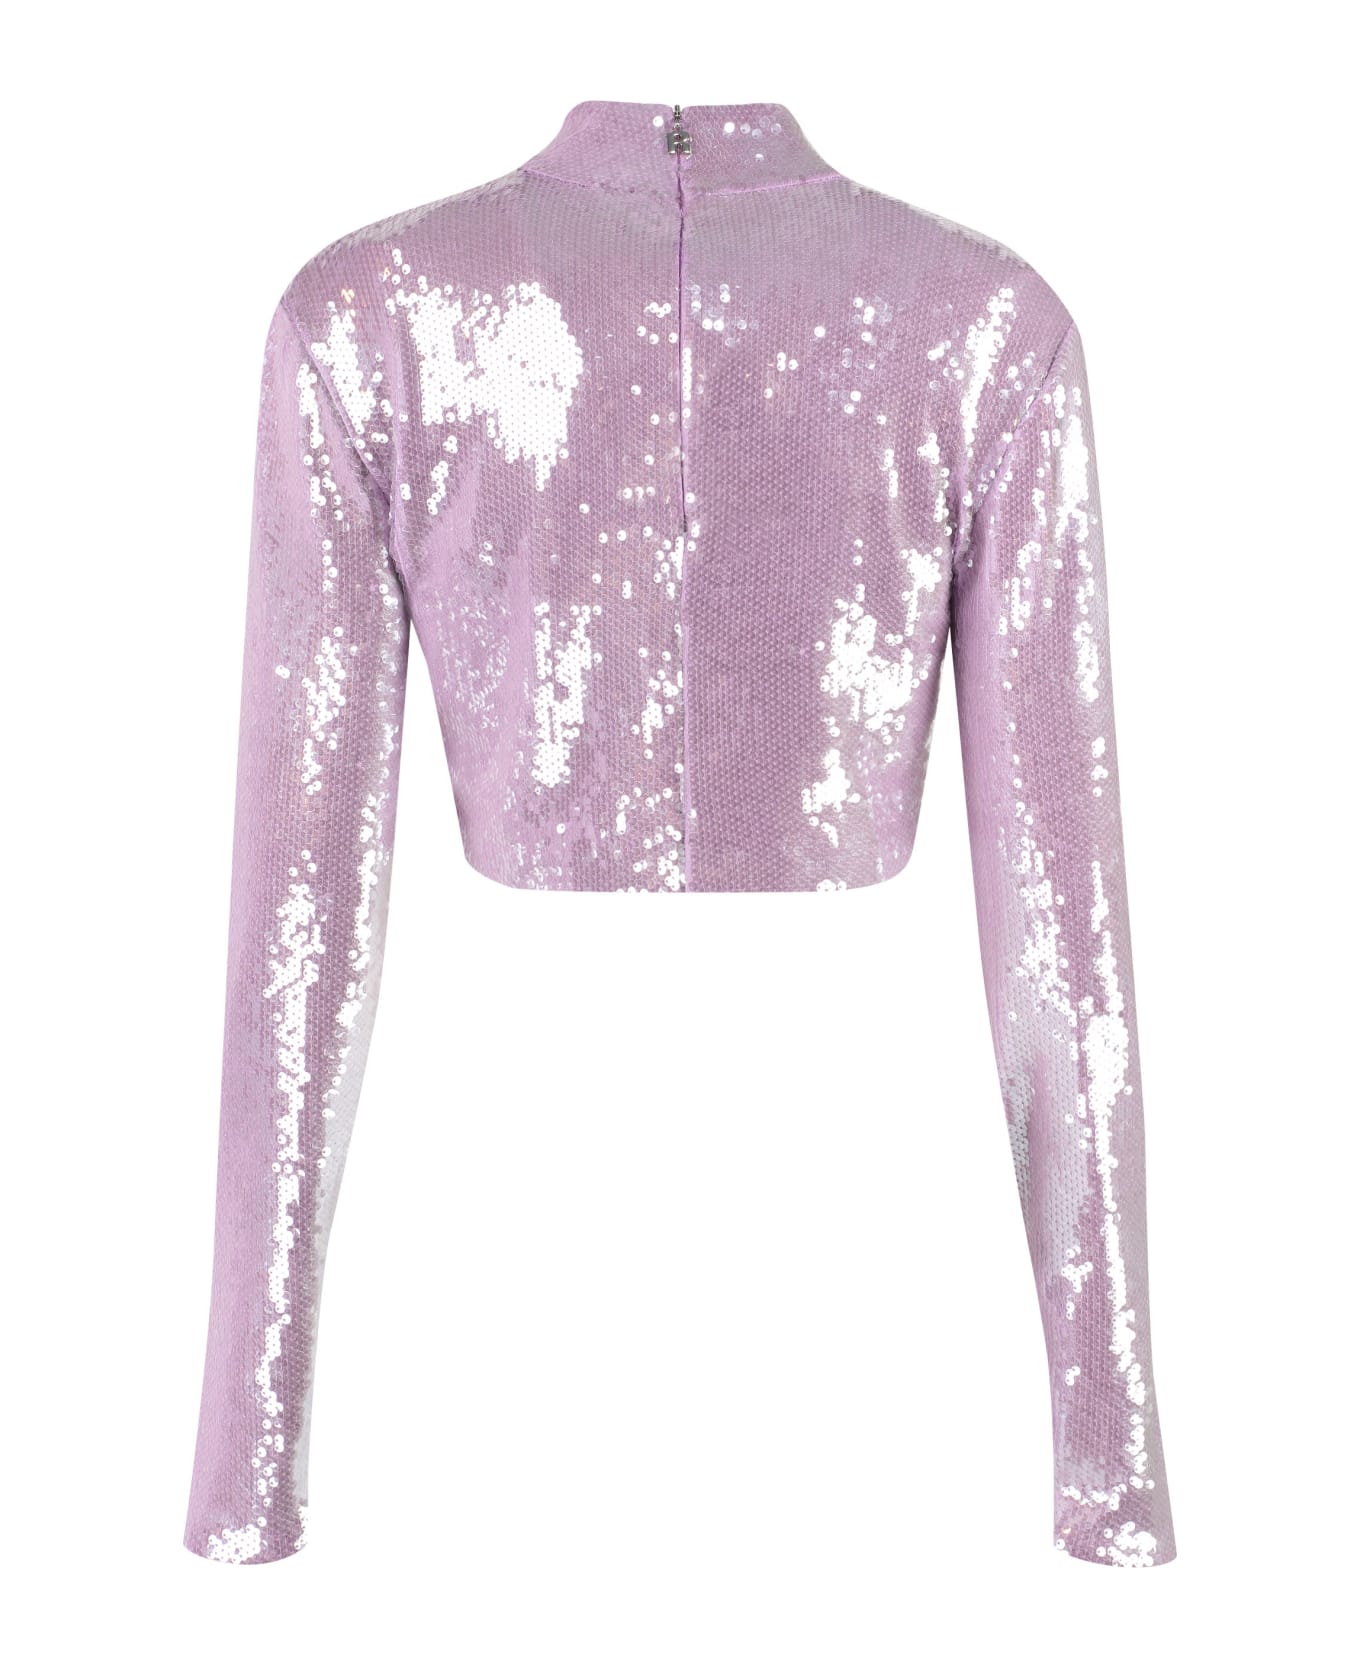 Rotate by Birger Christensen Long Sleeve Sequin Top - Lilac Tシャツ